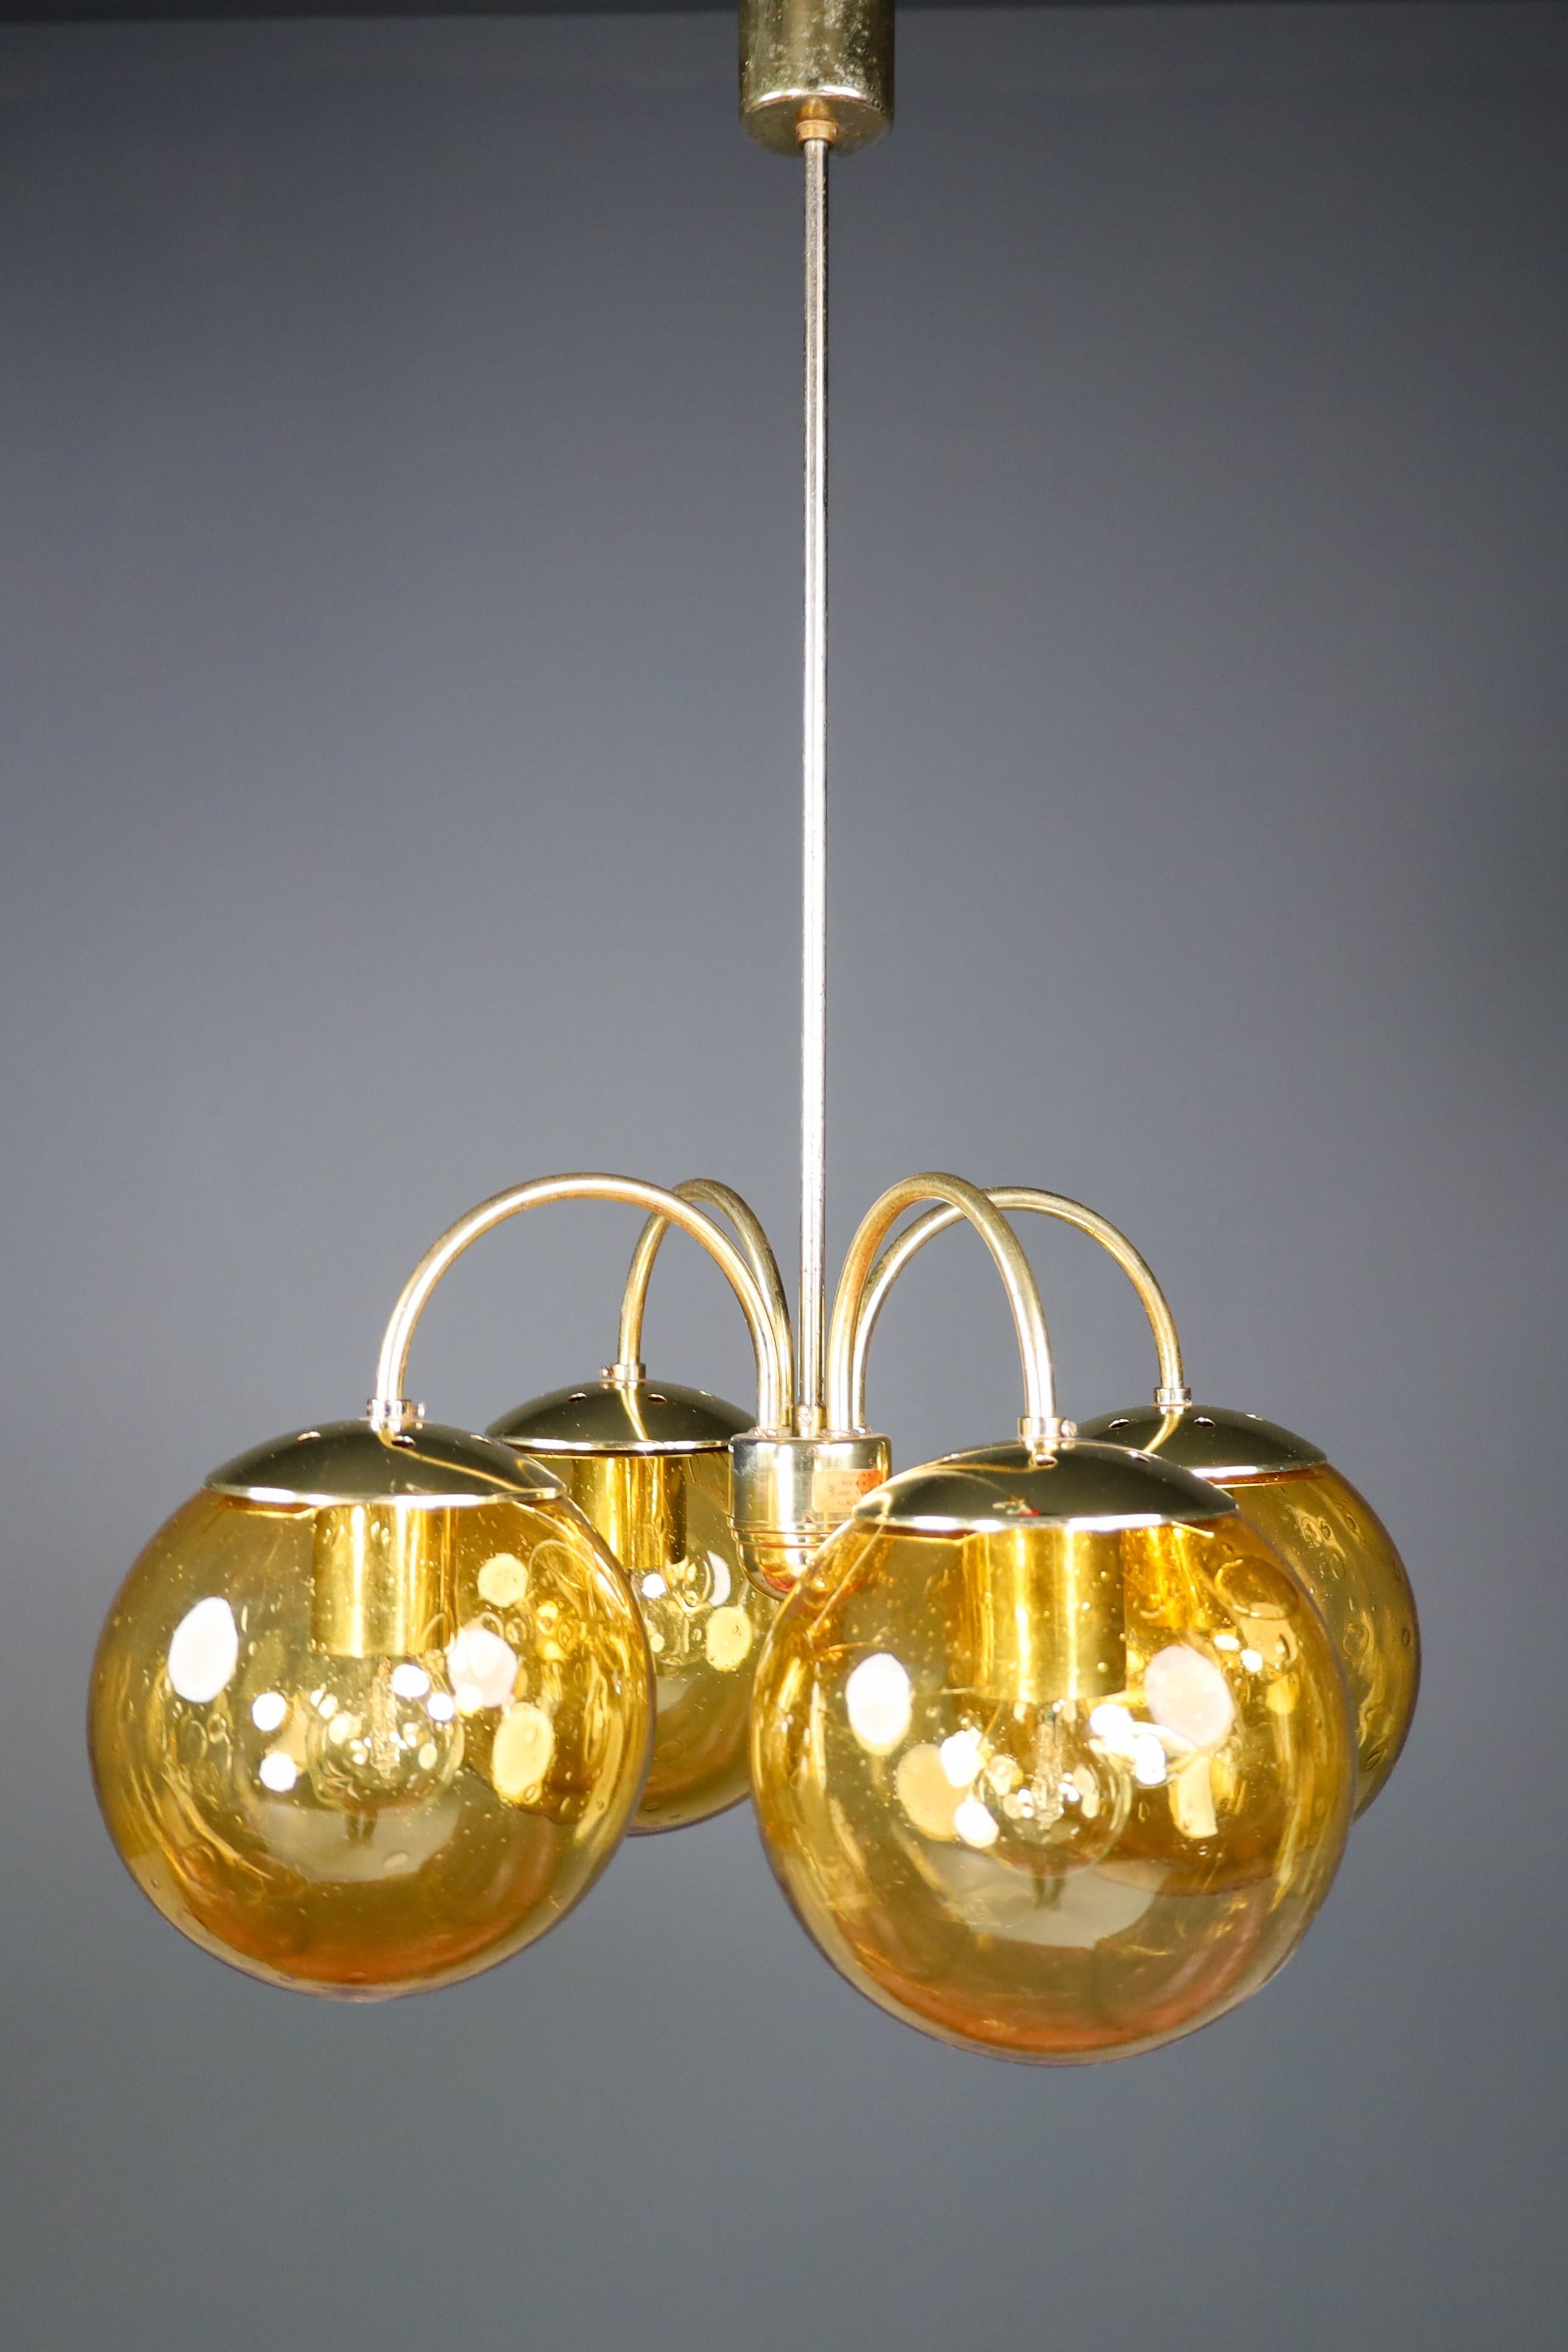 Large Chandelier in Amber Hand Blown Colored Glass Globes & Brass, Europe, 1970s For Sale 1